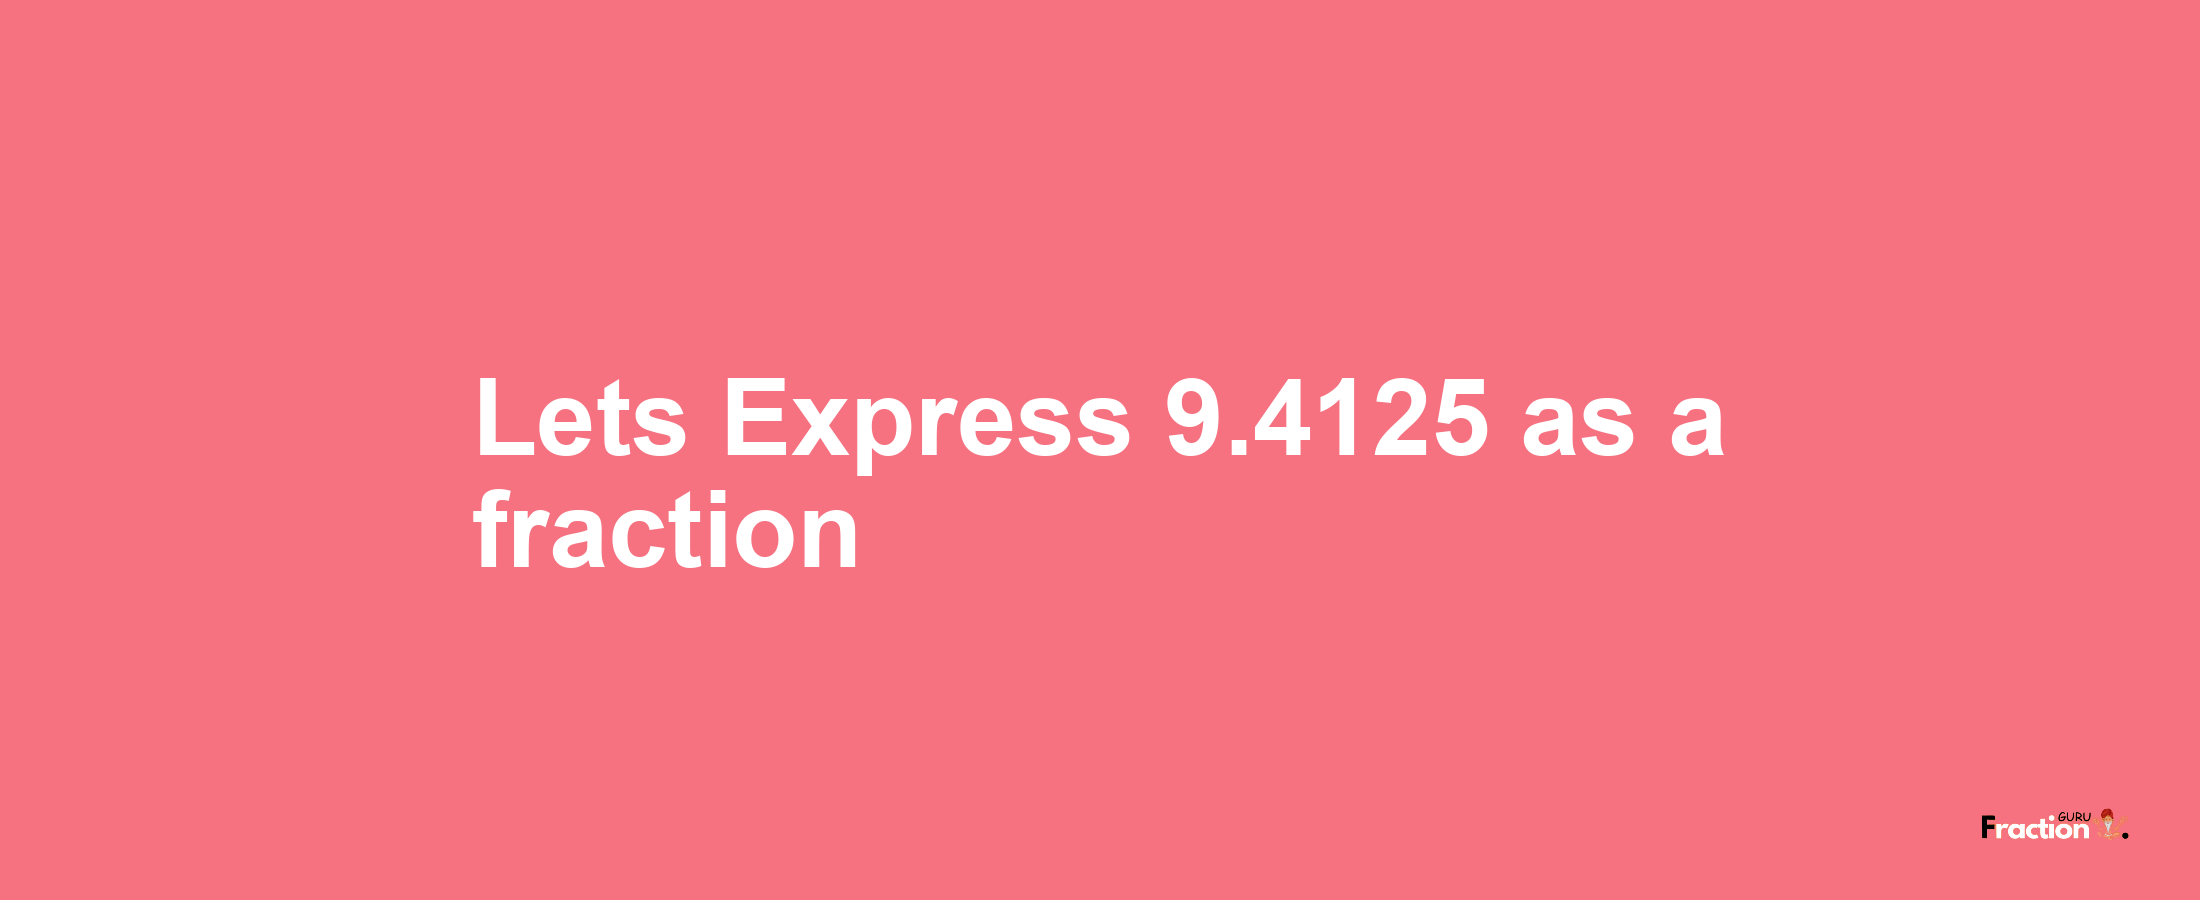 Lets Express 9.4125 as afraction